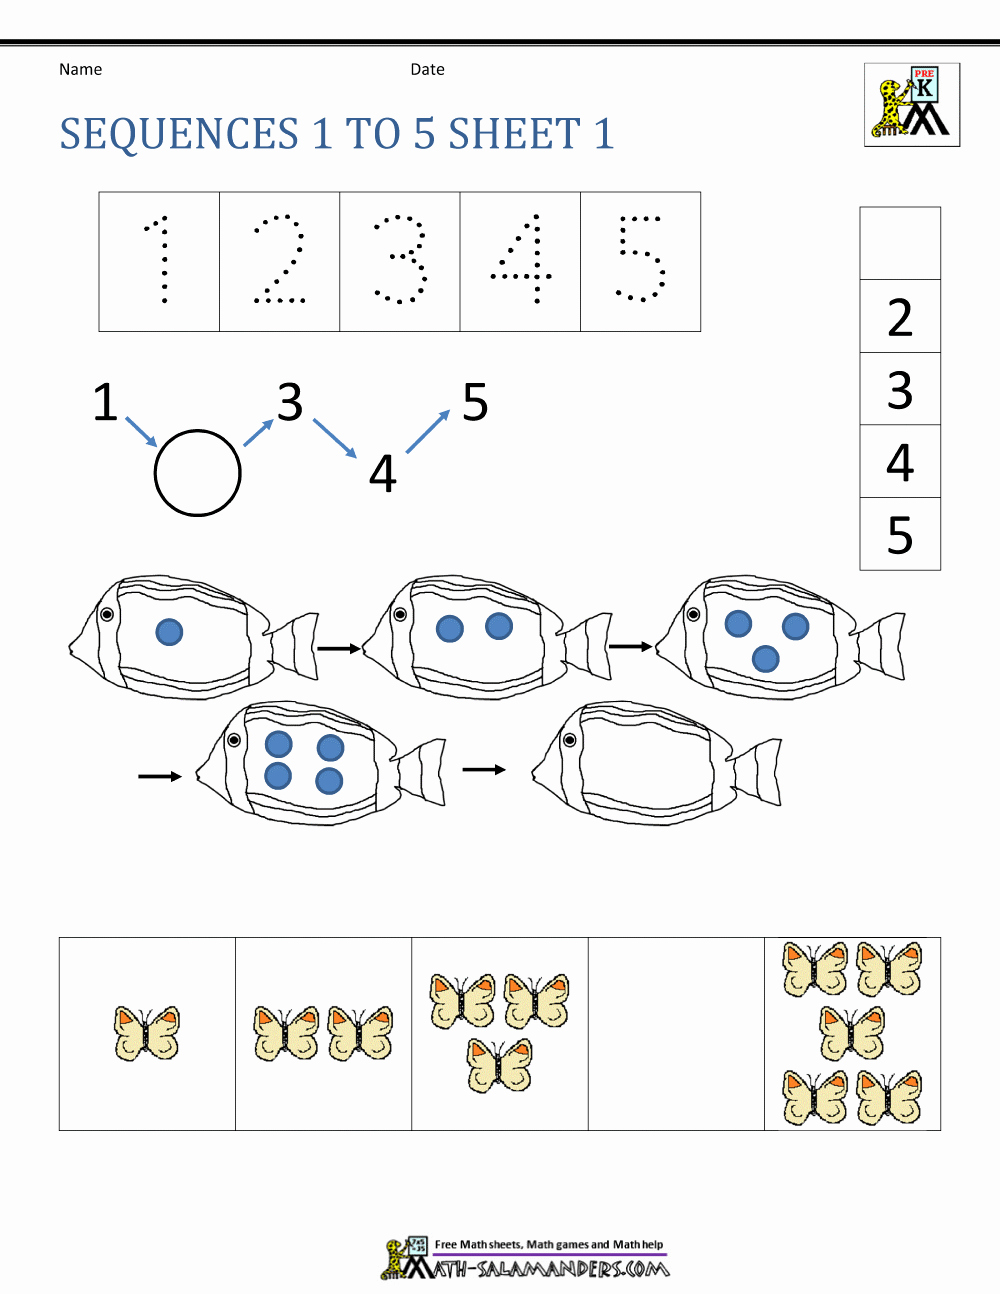 Sequencing Worksheets for Kindergarten Awesome Preschool Number Worksheets Sequencing to 10